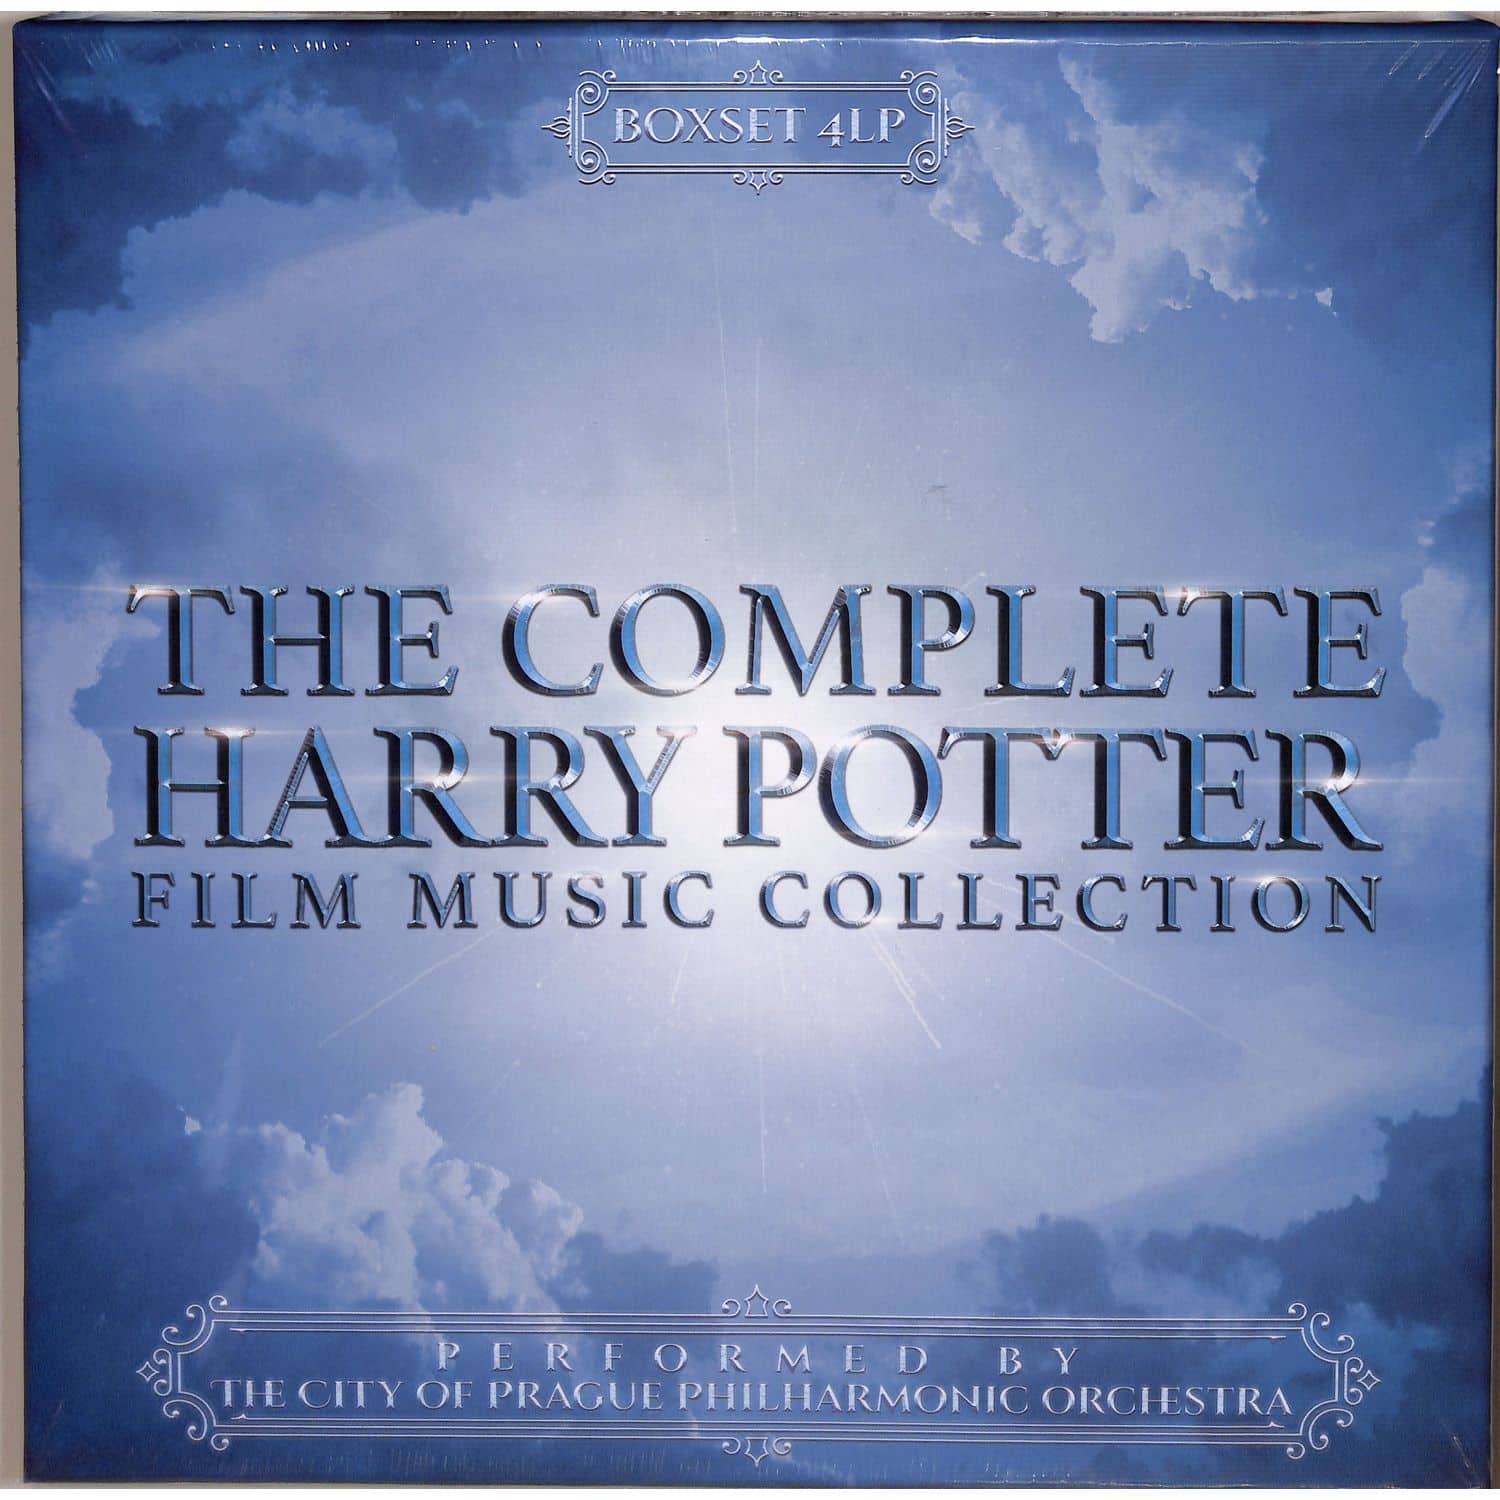 The City Of Prague Philharmonic Orchestra - THE COMPLETE HARRY POTTER FILM MUSIC COLL.